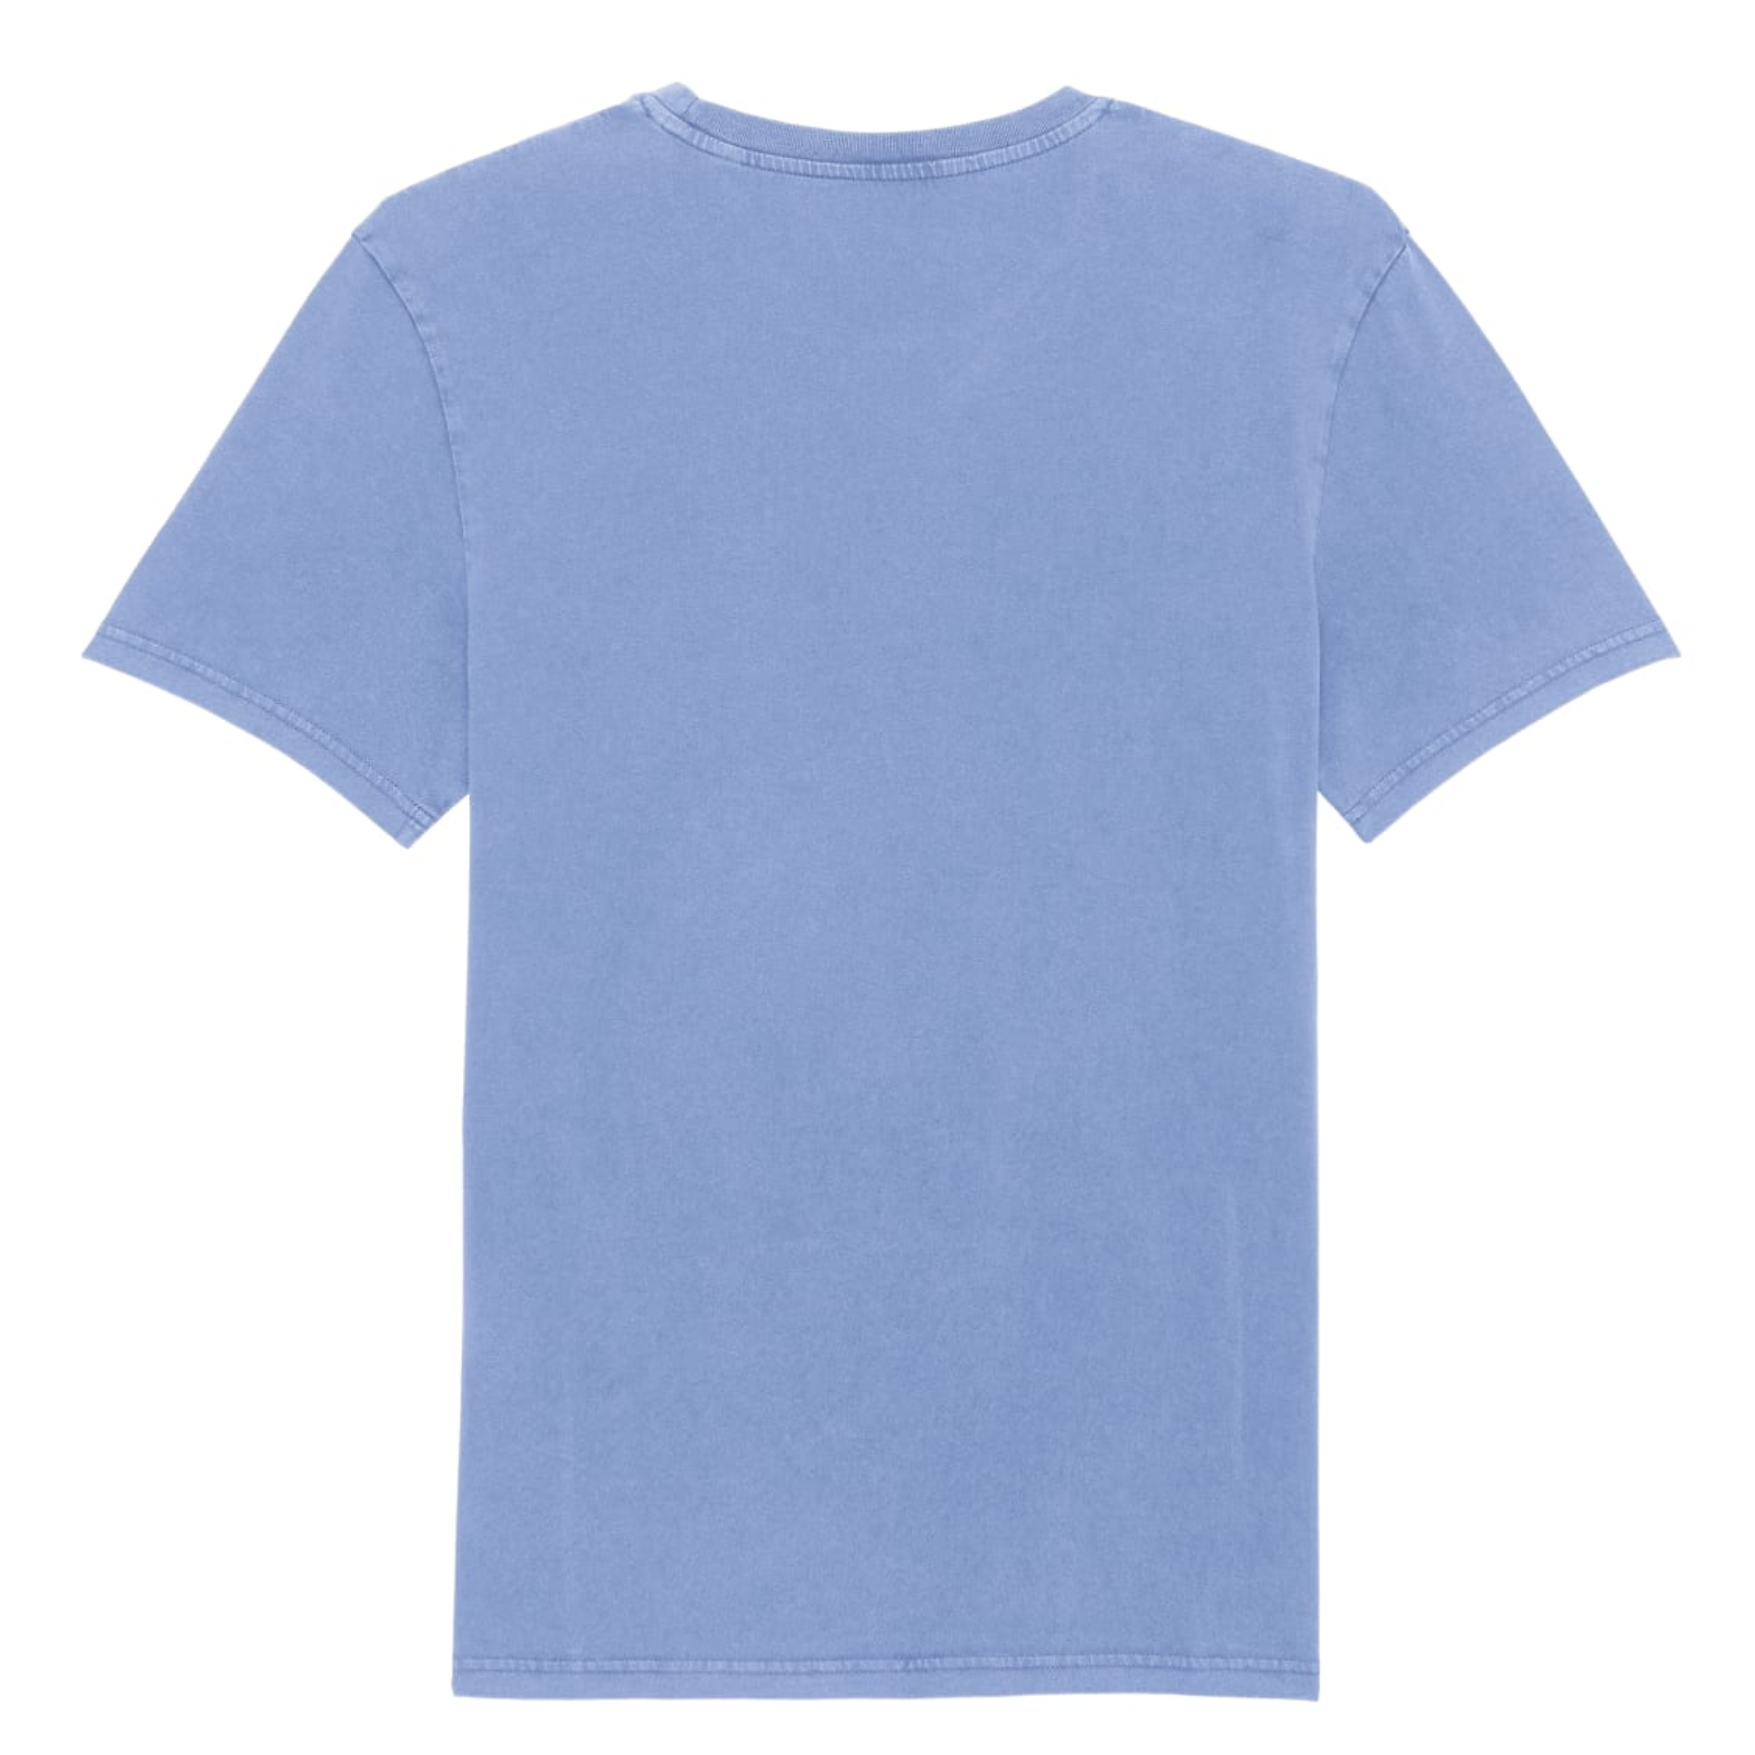 The back of our Beyond the Sea t-shirt from the Vintage Rocks collection of tees. Exclusively from Waves and Wild Water, this sea blue t-shirt is constructed from organic cotton and has been individually garment dyed to create a vintage look.